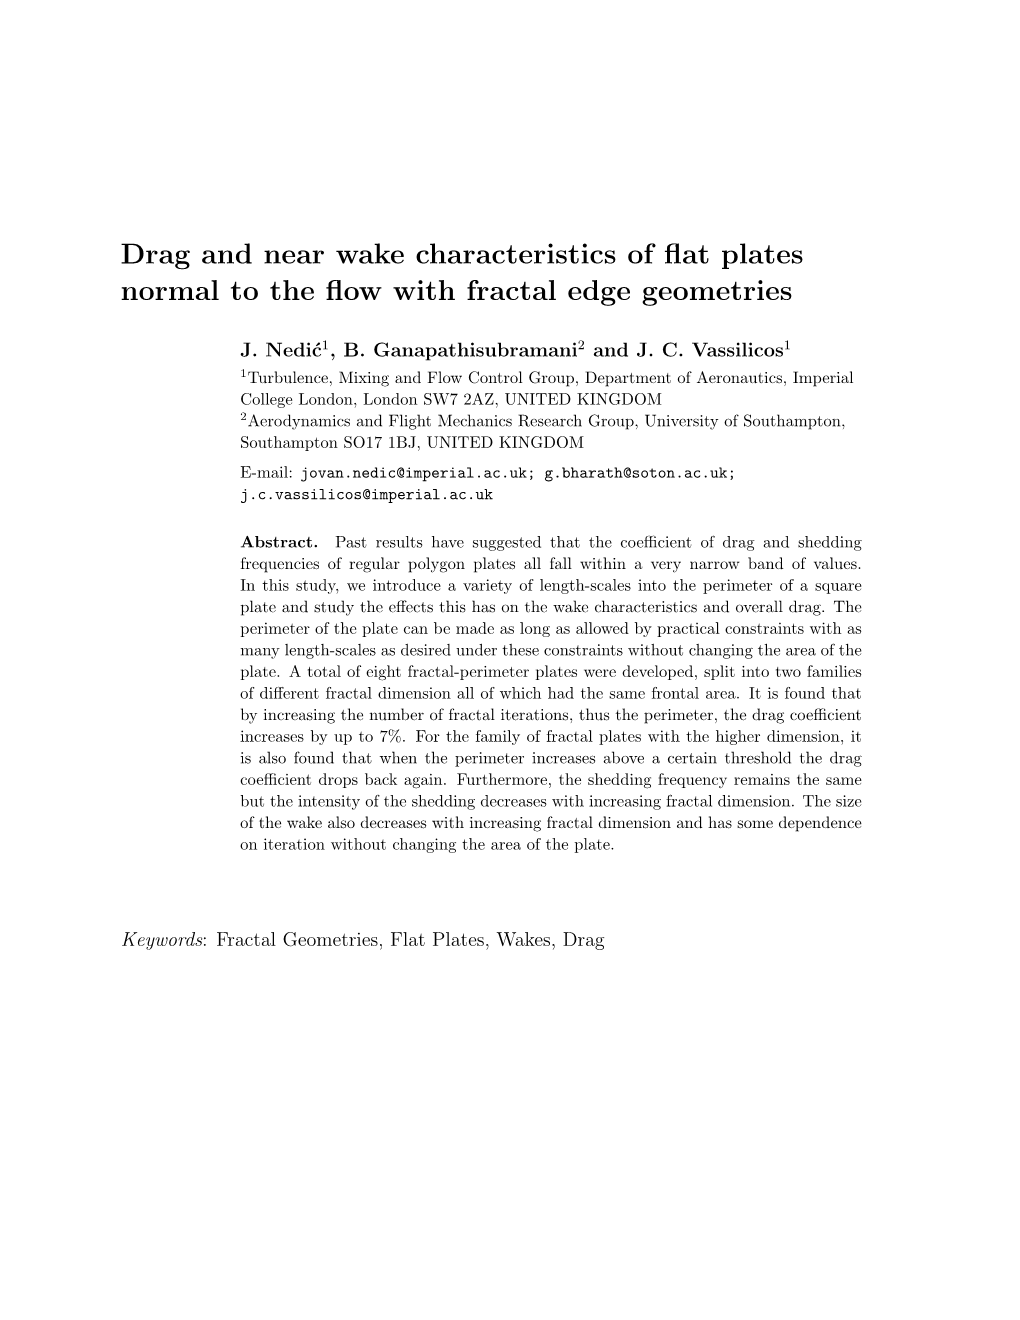 Drag and Near Wake Characteristics of Flat Plates Normal to the Flow with Fractal Edge Geometries